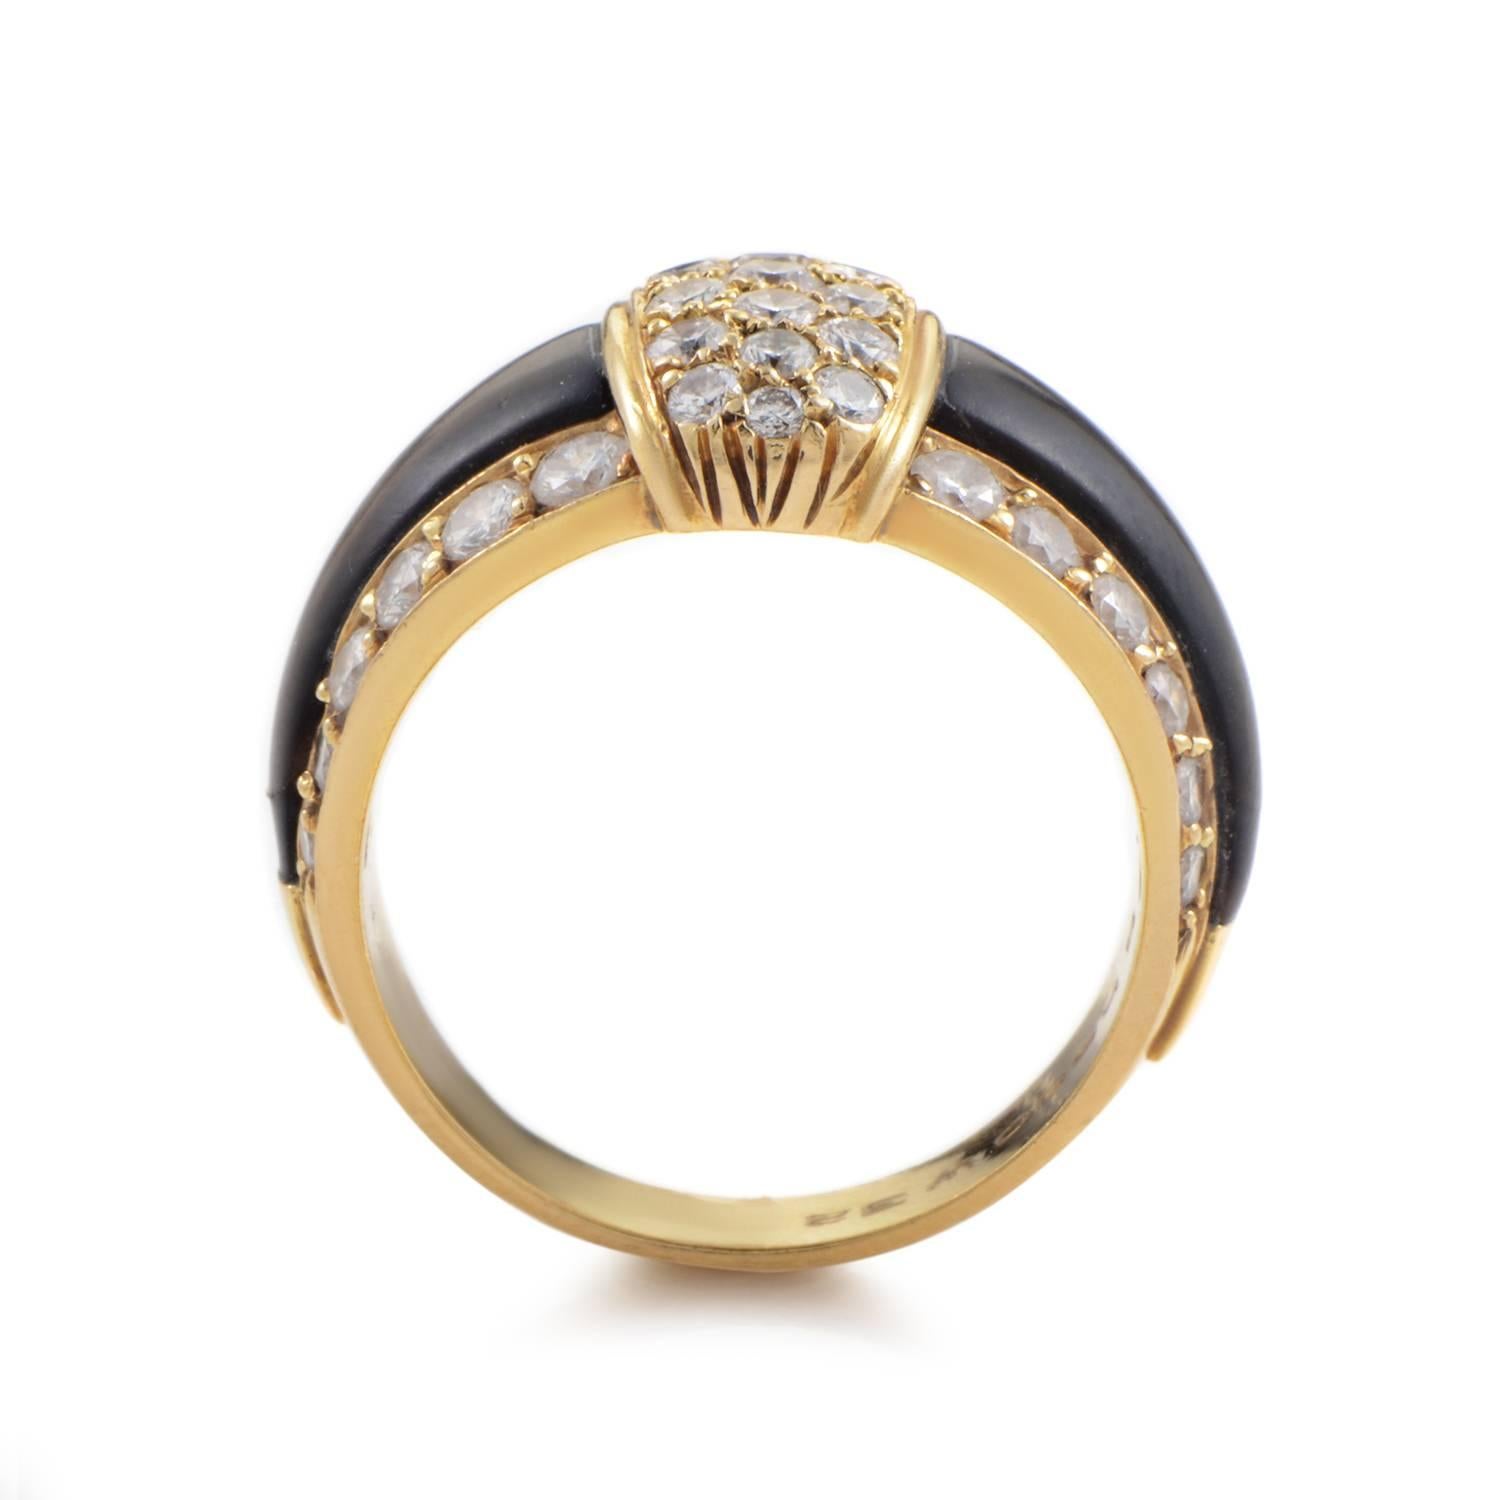 An exotic splash of oceanic mystique completes this ring design from Van Cleef & Arpels. The band rises in 18K Yellow Gold, gaining a bold expanse in its ascent. The band's center is filled with the iridescence gloss of black mother of pearl. The